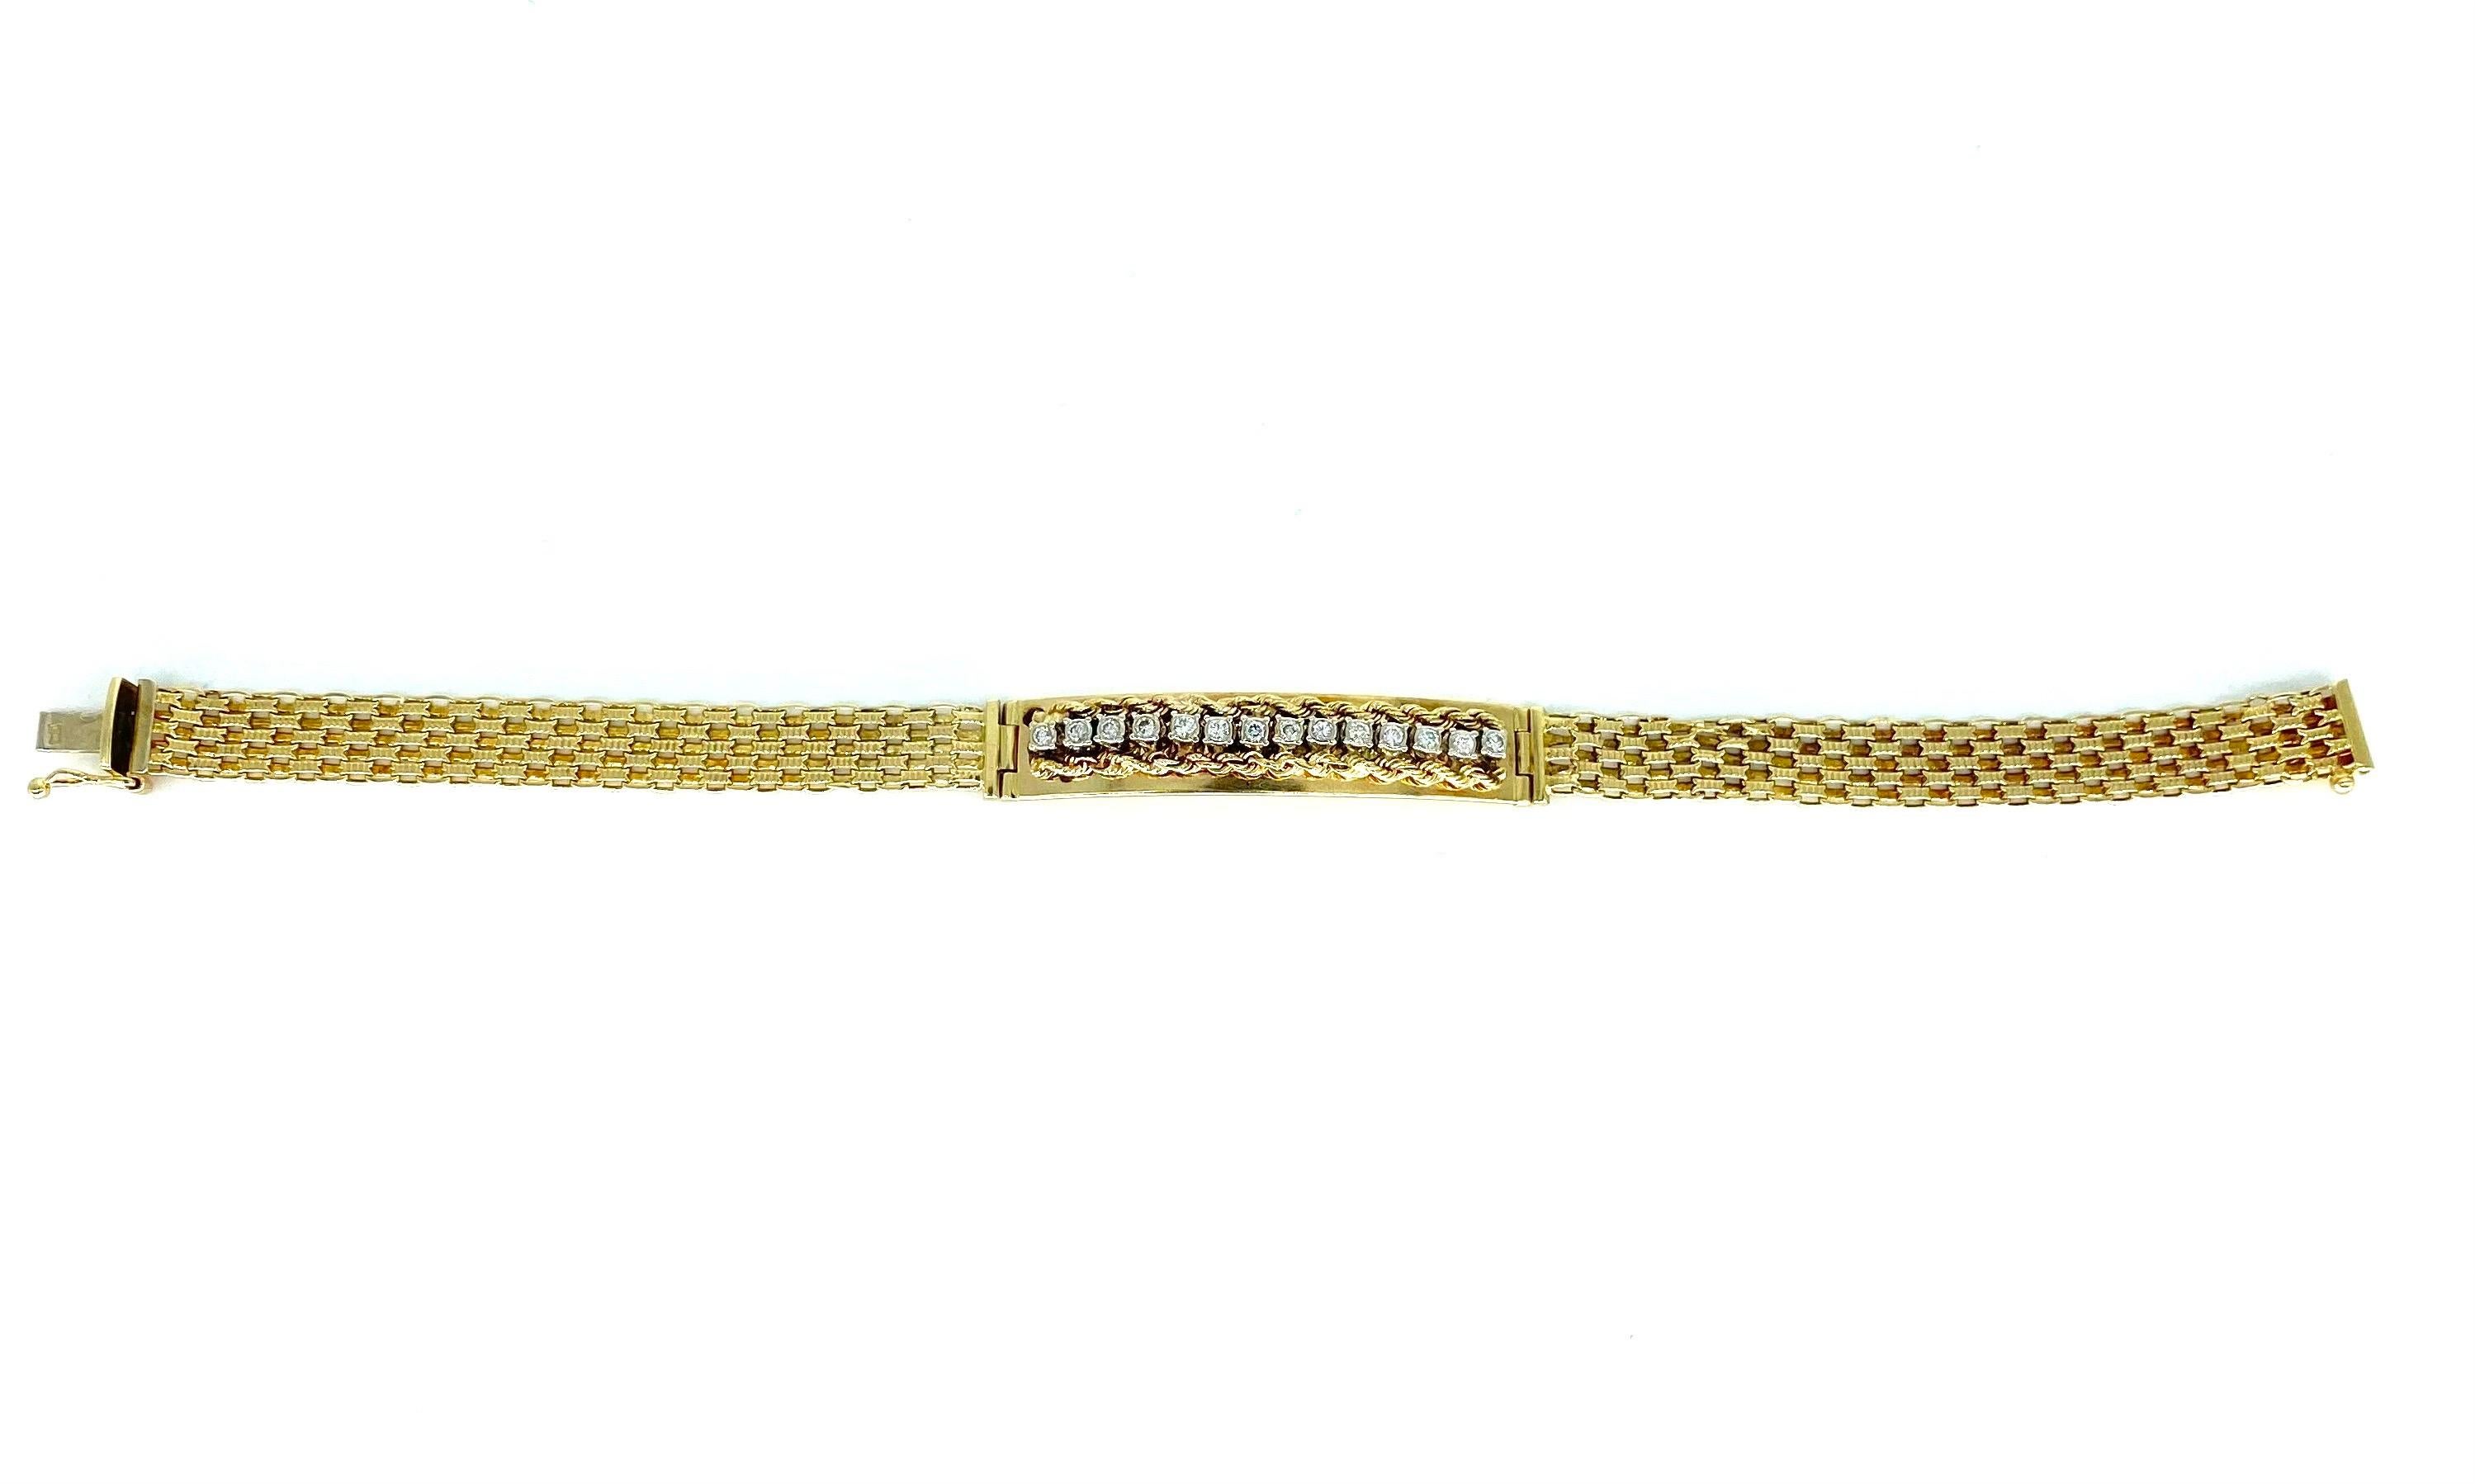 Vintage Designer 0.70 Carat Diamond Fancy Rope ID Link Bracelet 14k Gold. Beautiful bracelet featuring fancy design link throughout with an ID link center consisting of 14 white natural diamonds. What’s very unique in this bracelet is the rope chain